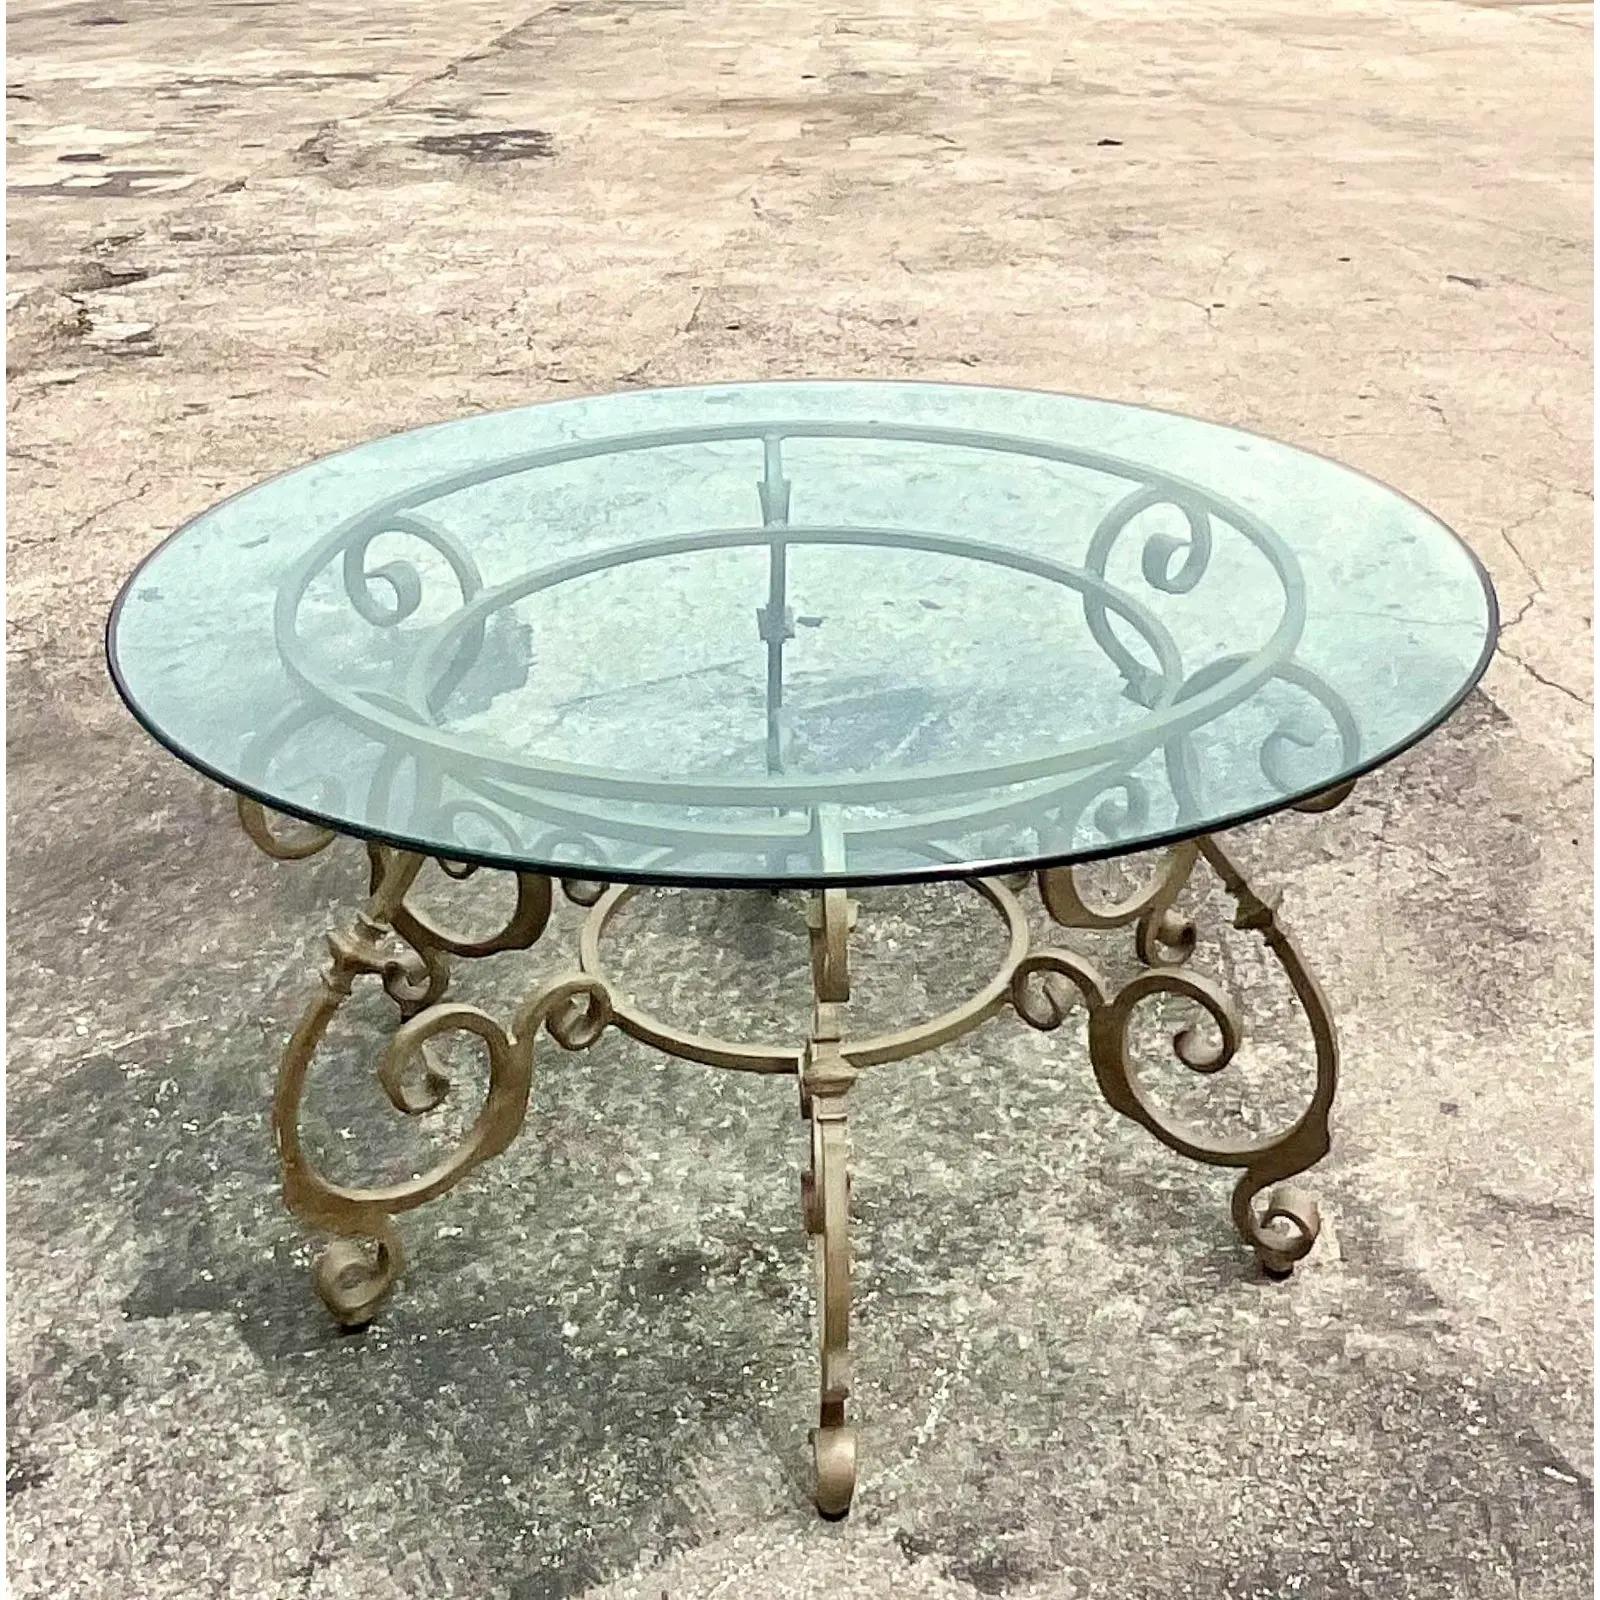 Fantastic vintage wrought iron dining table. Beautiful large table that is perfect indoors or outside in a covered area. Acquired from a Palm Beach estate.